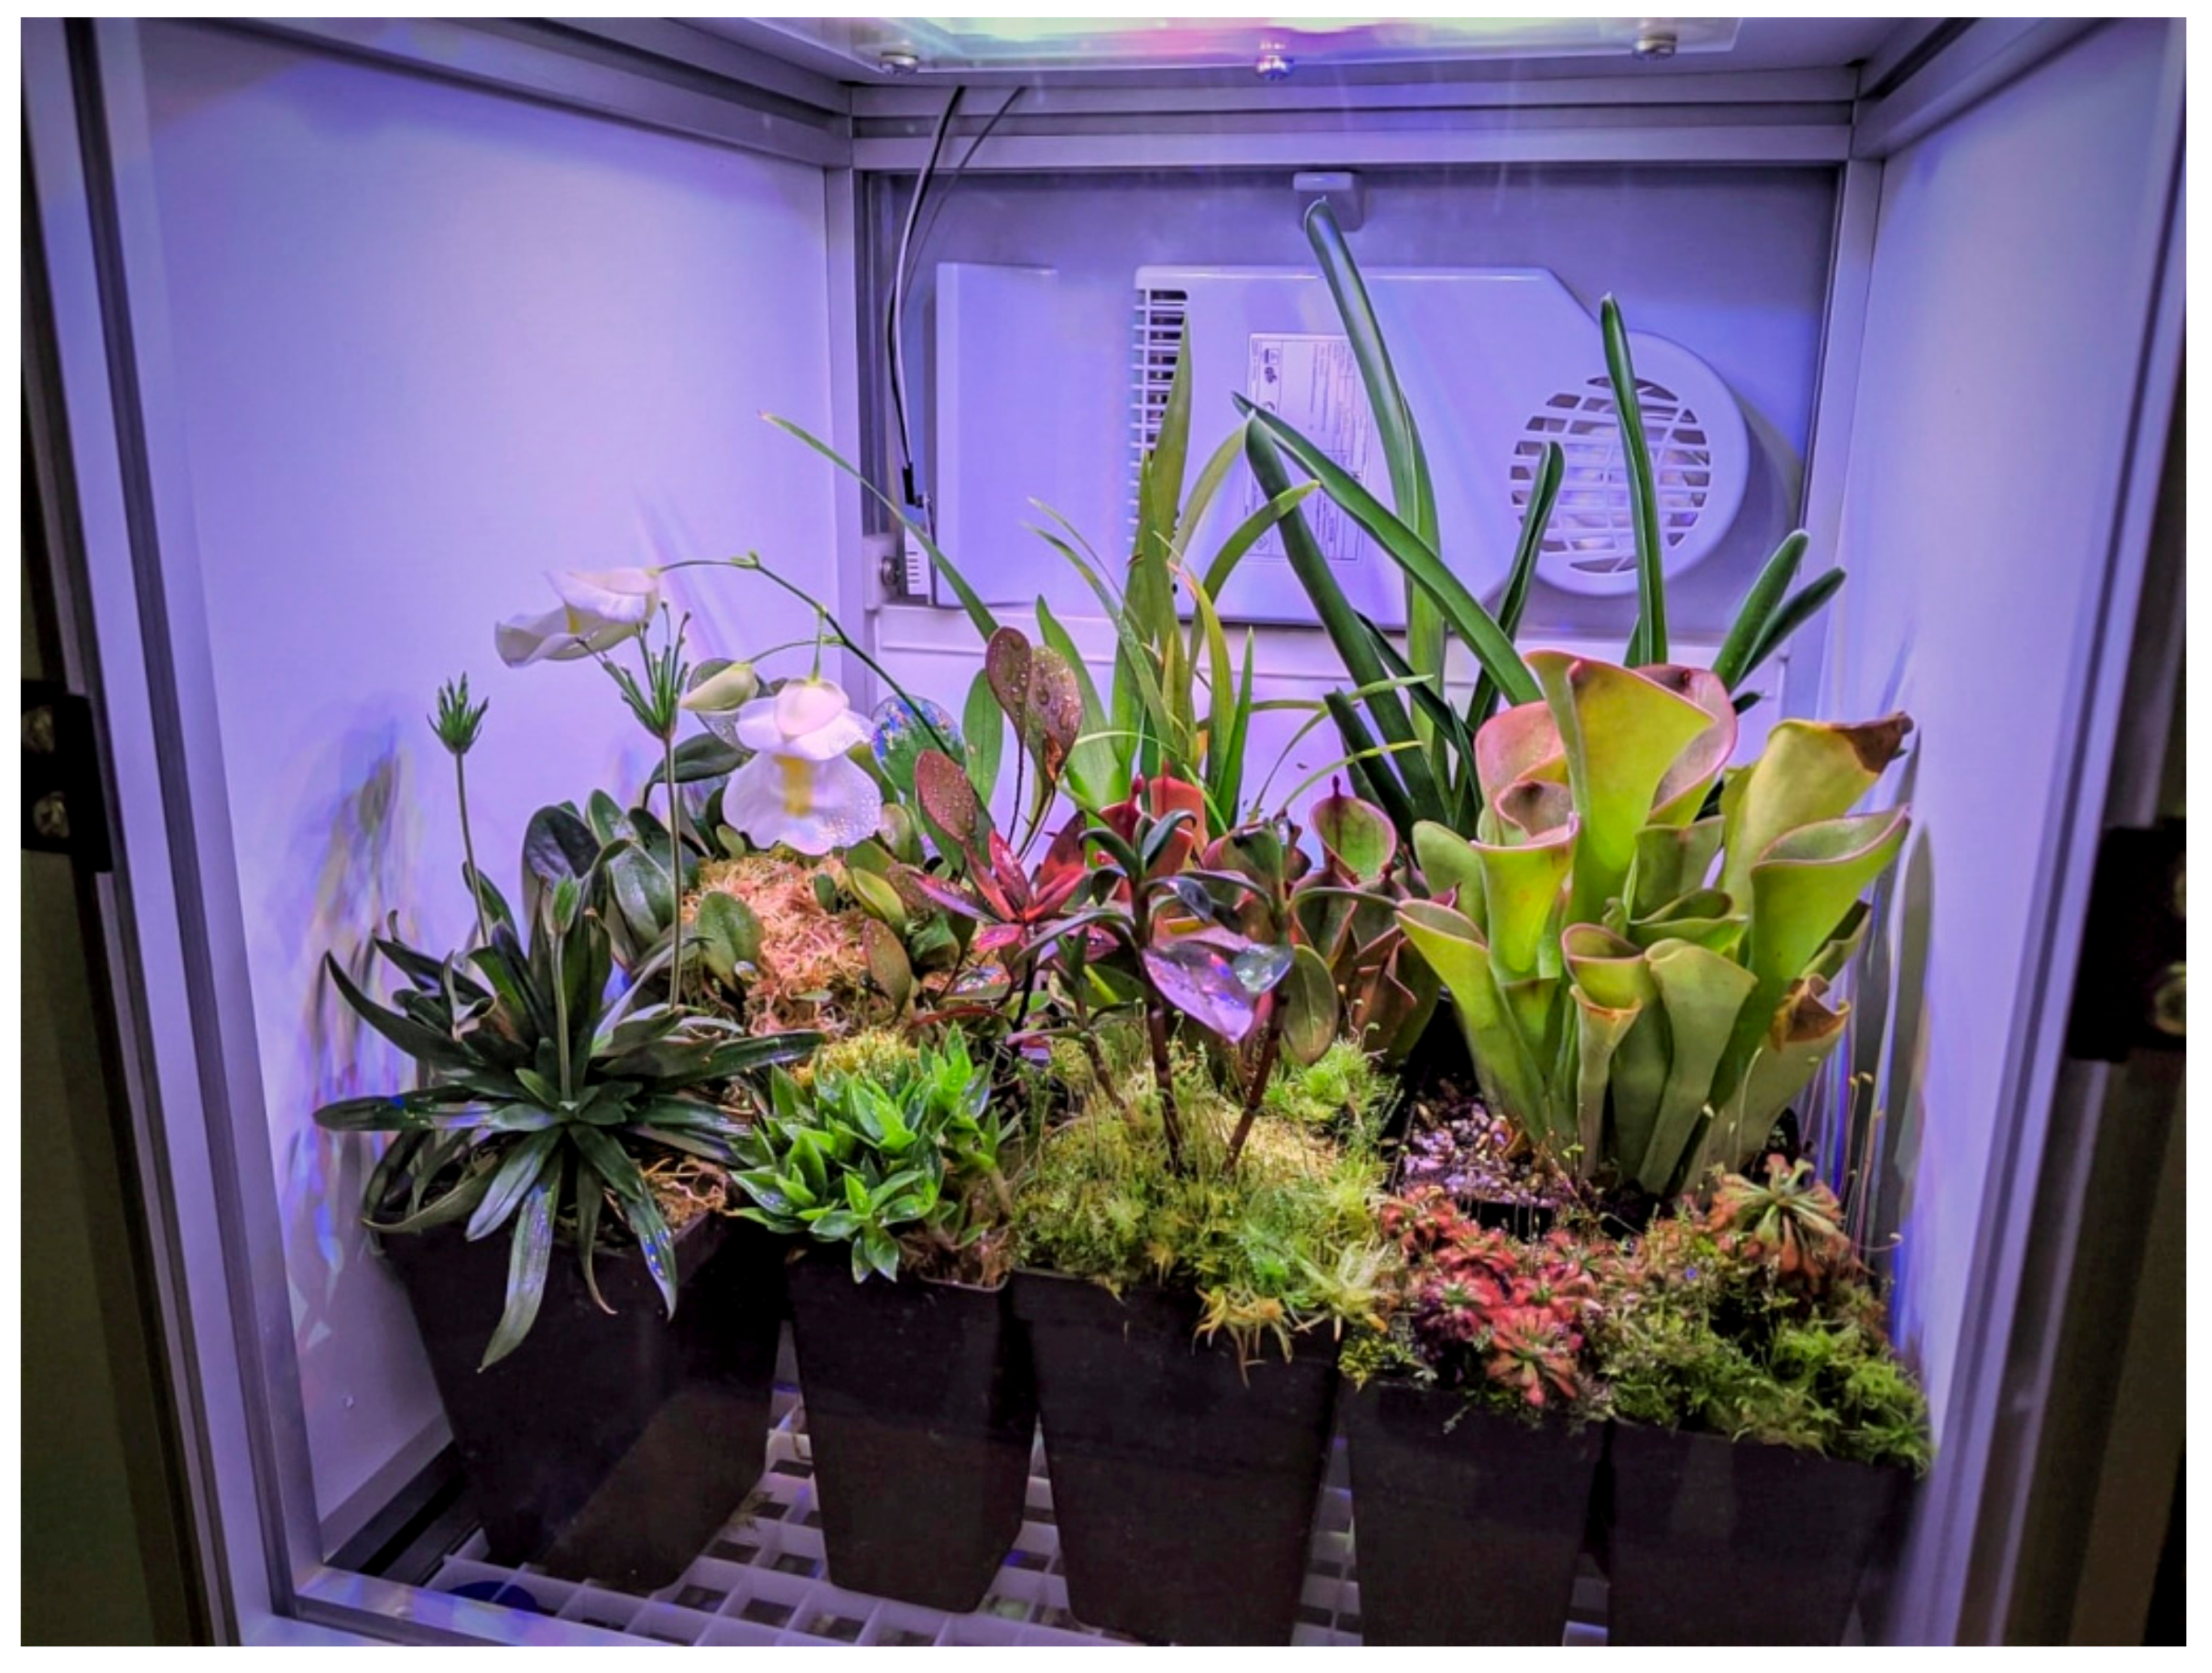 Technologies | Free Full-Text | Prototype of a Low-Cost Compact  Horticultural Chamber for Indoor Cultivation of Tropical Highland Wetland  Flora